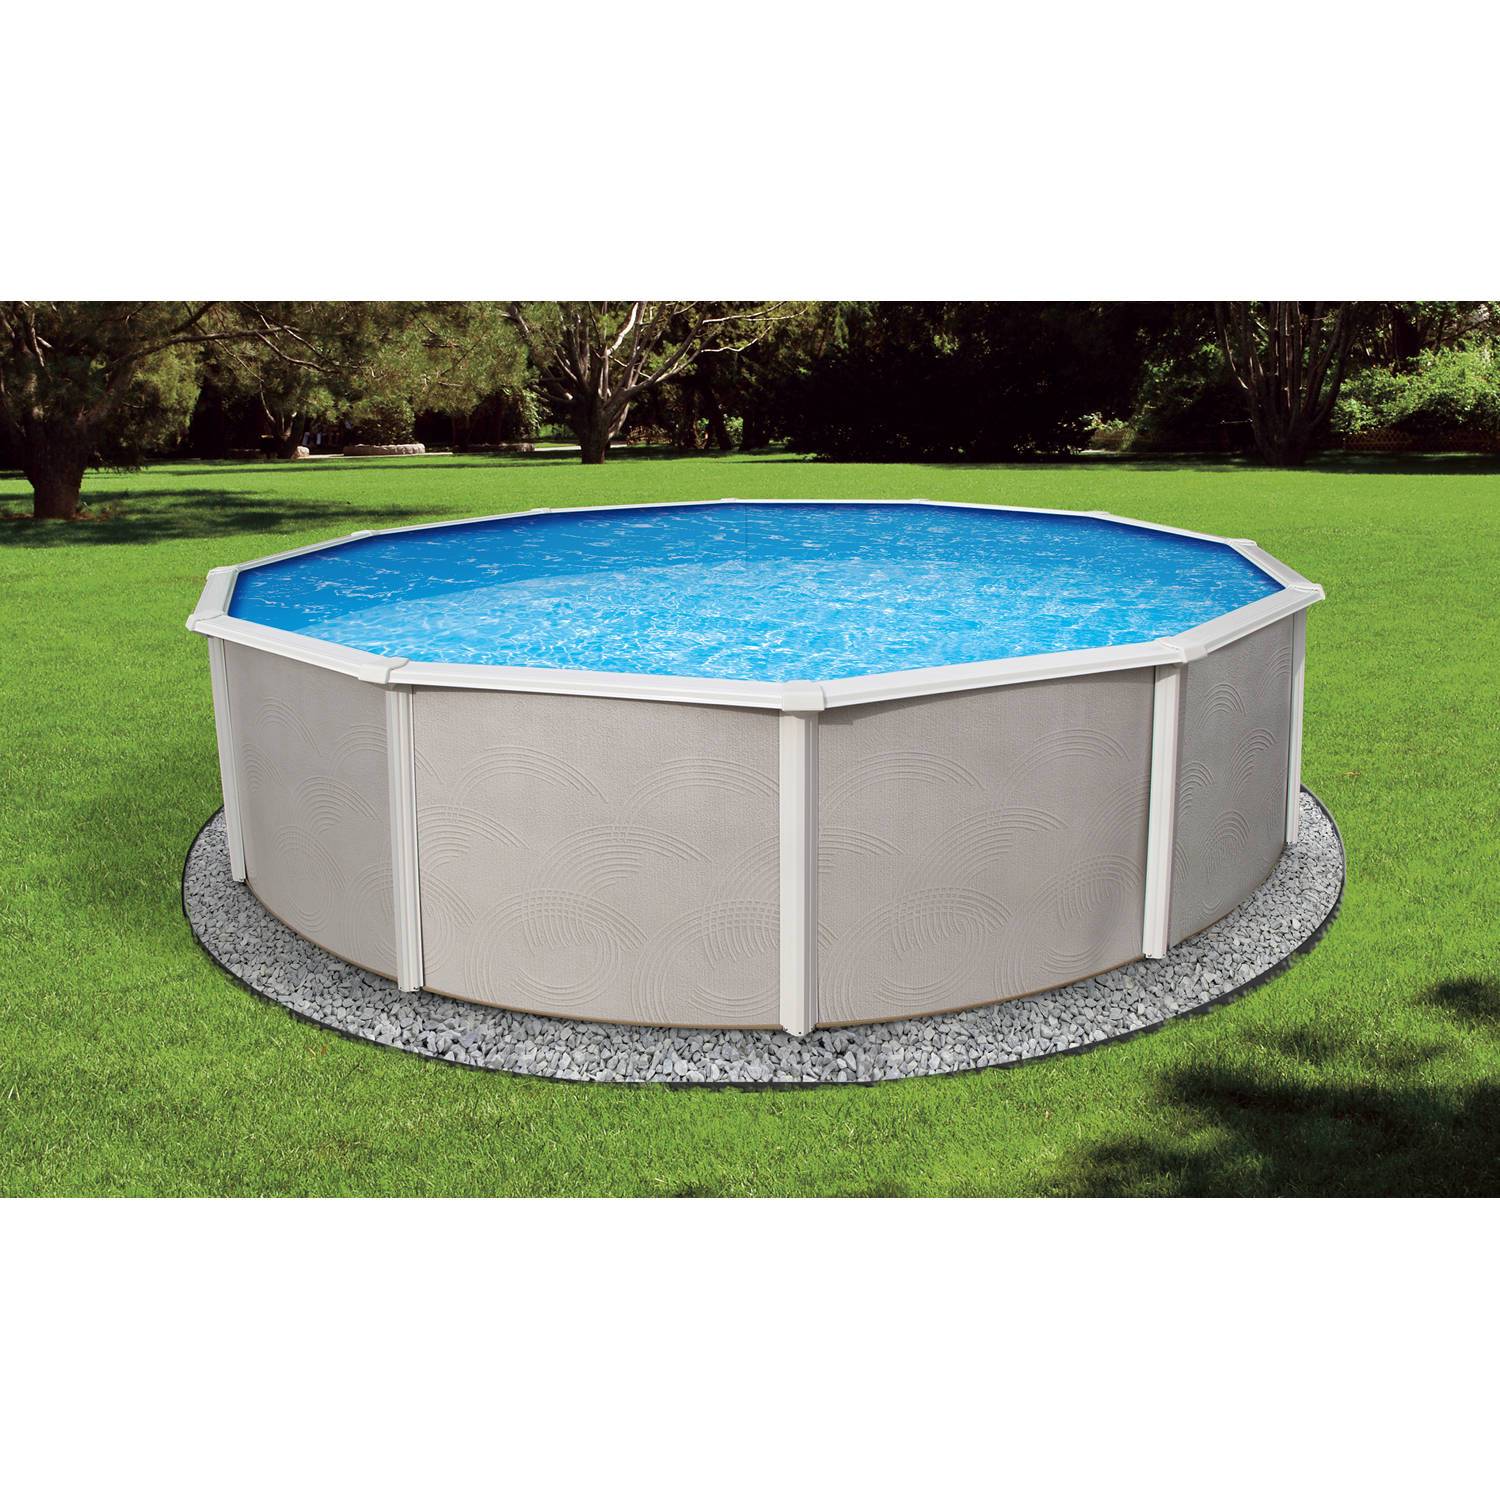 Blue Wave BELIZE 18' x 33' Oval Steel Wall Above Ground Pool - 52" Depth